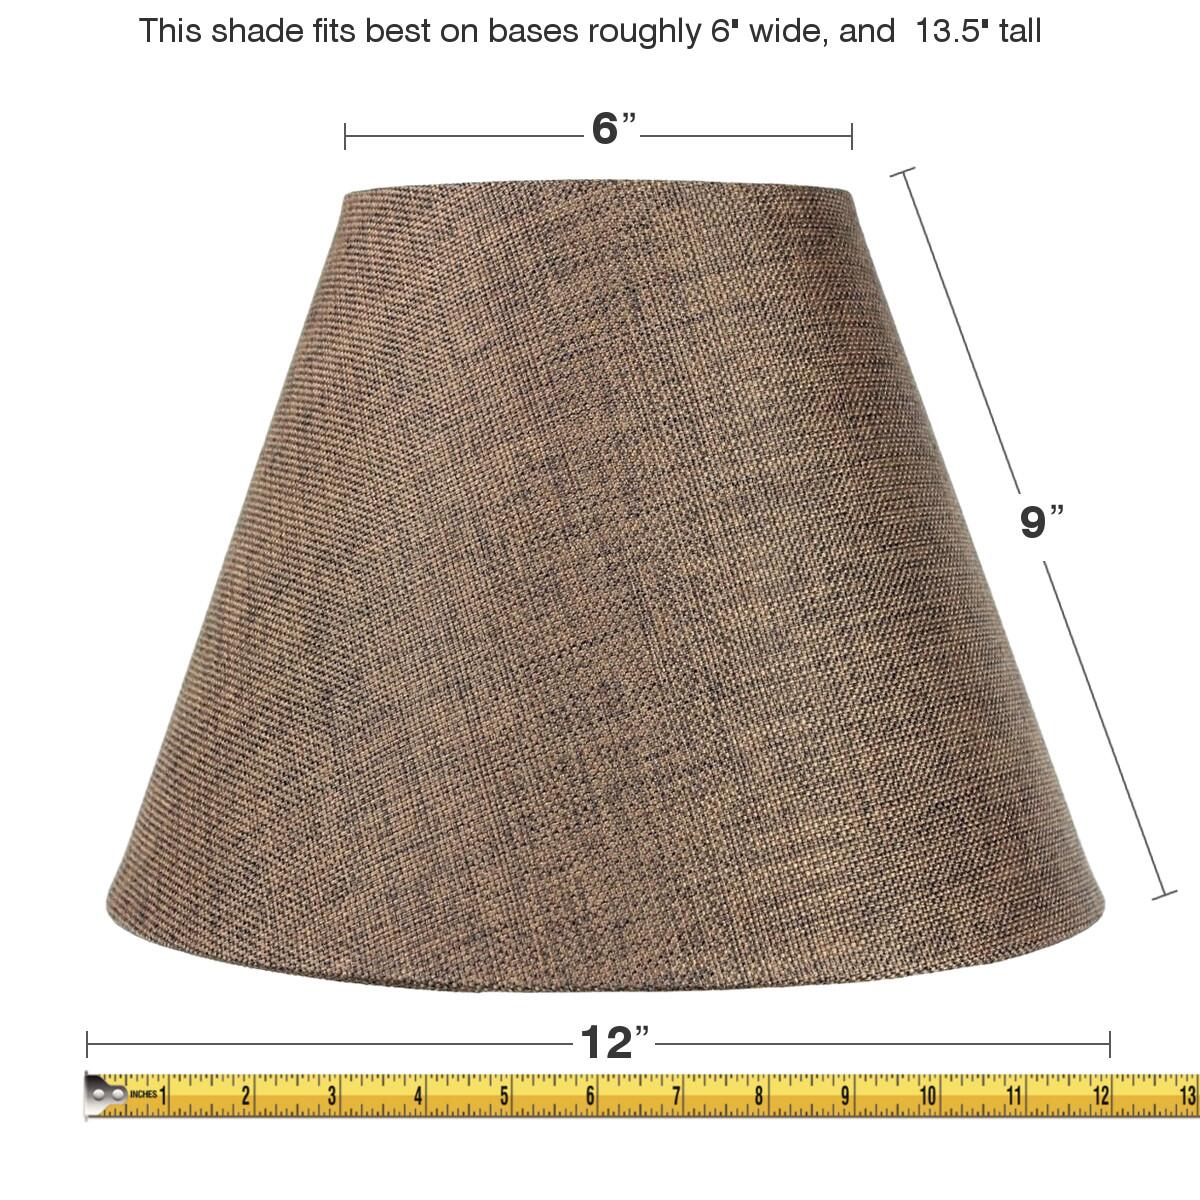 Homeconcept 6x12x9 Slip Uno Fitter Hard, What Is A Slip Uno Fitter Lamp Shade